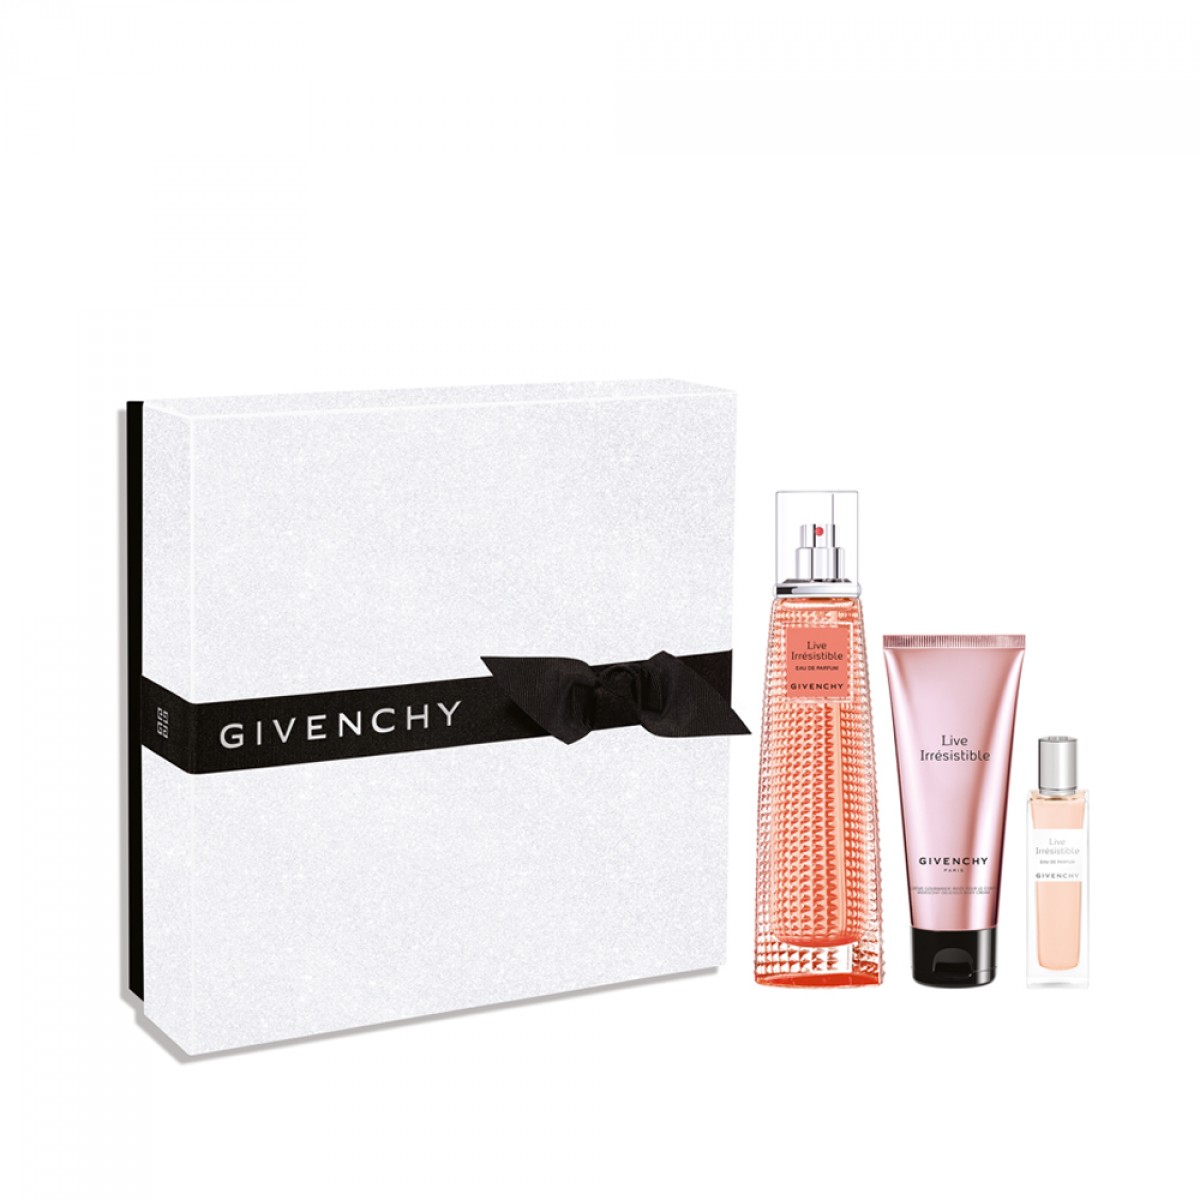 givenchy live irresistible body cream